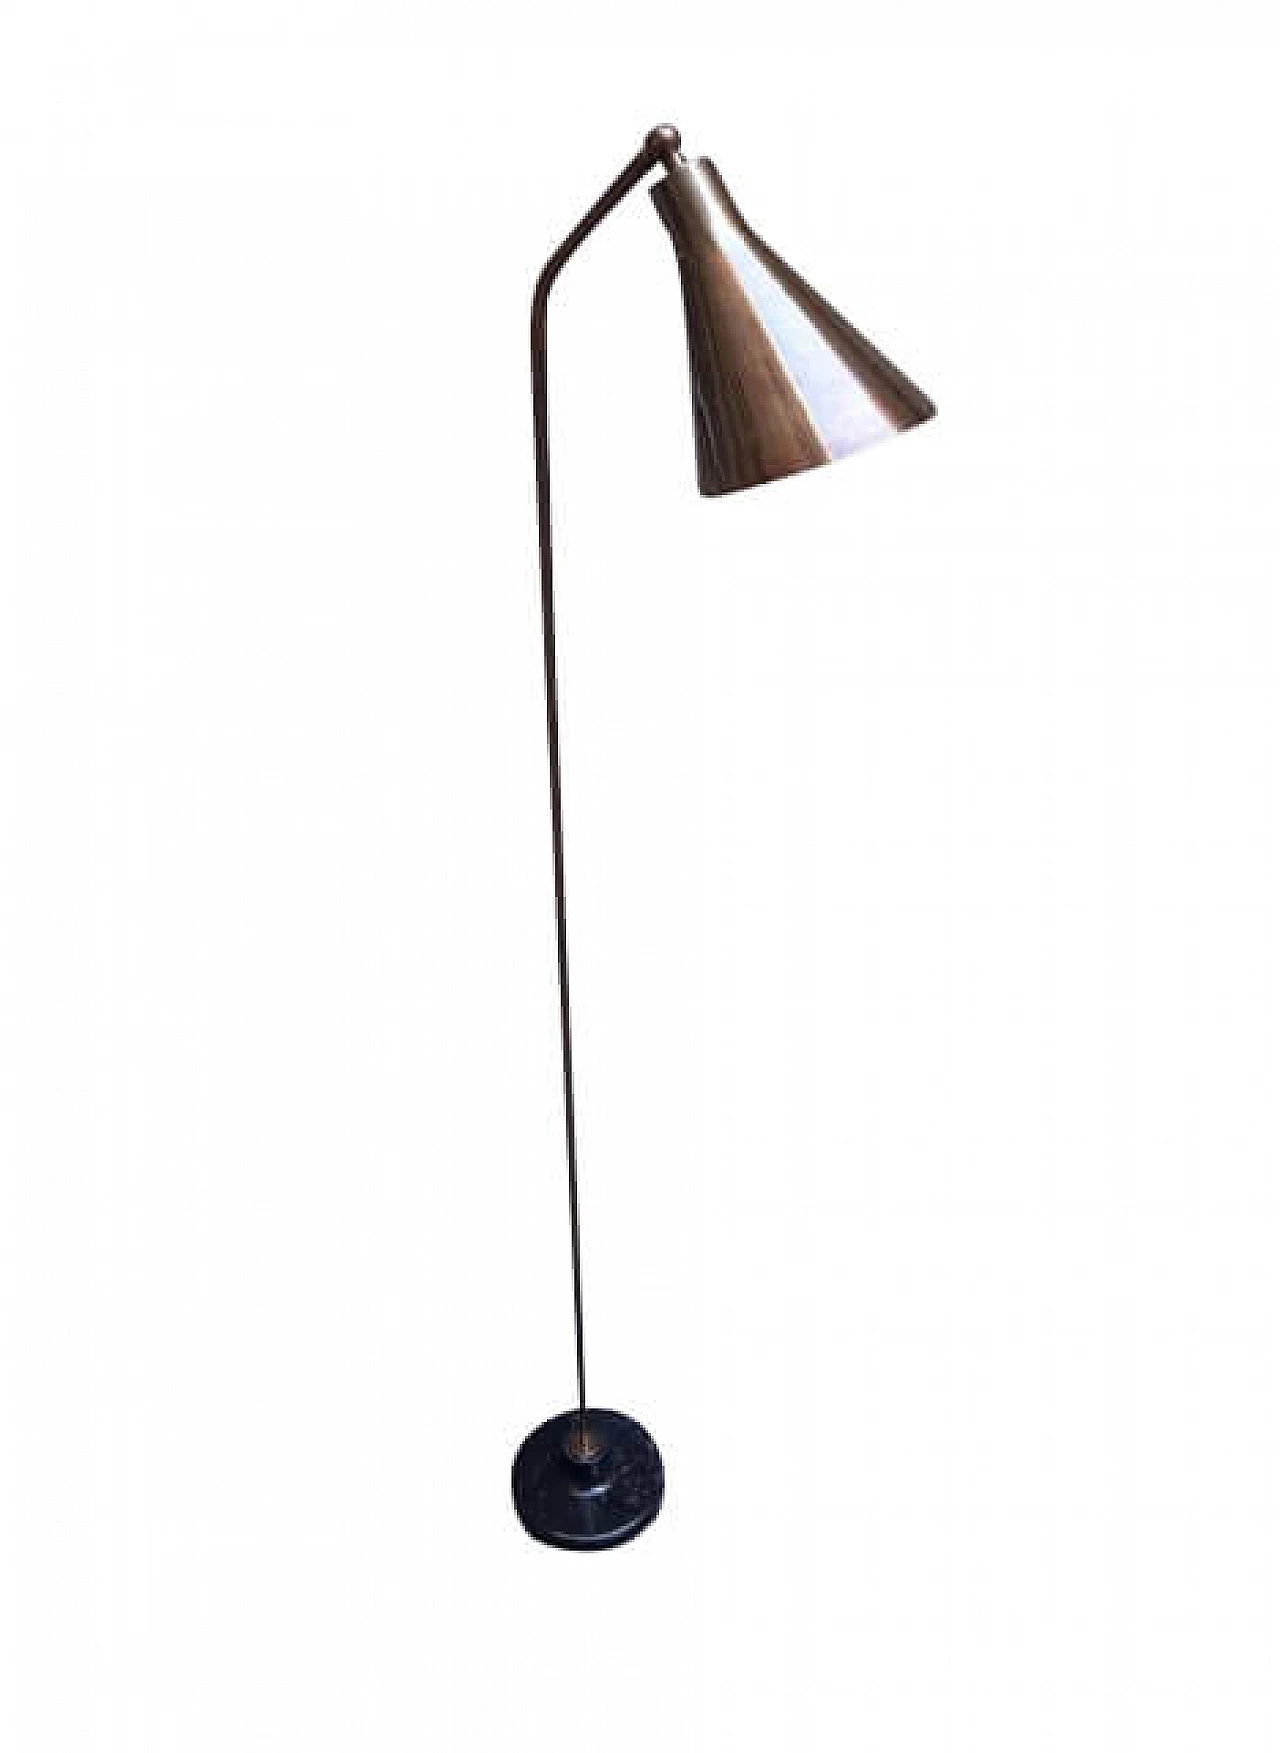 LTE3 floor lamp in burnished brass with marble base by Ignazio Gardella for Azucena, 2000 1262248